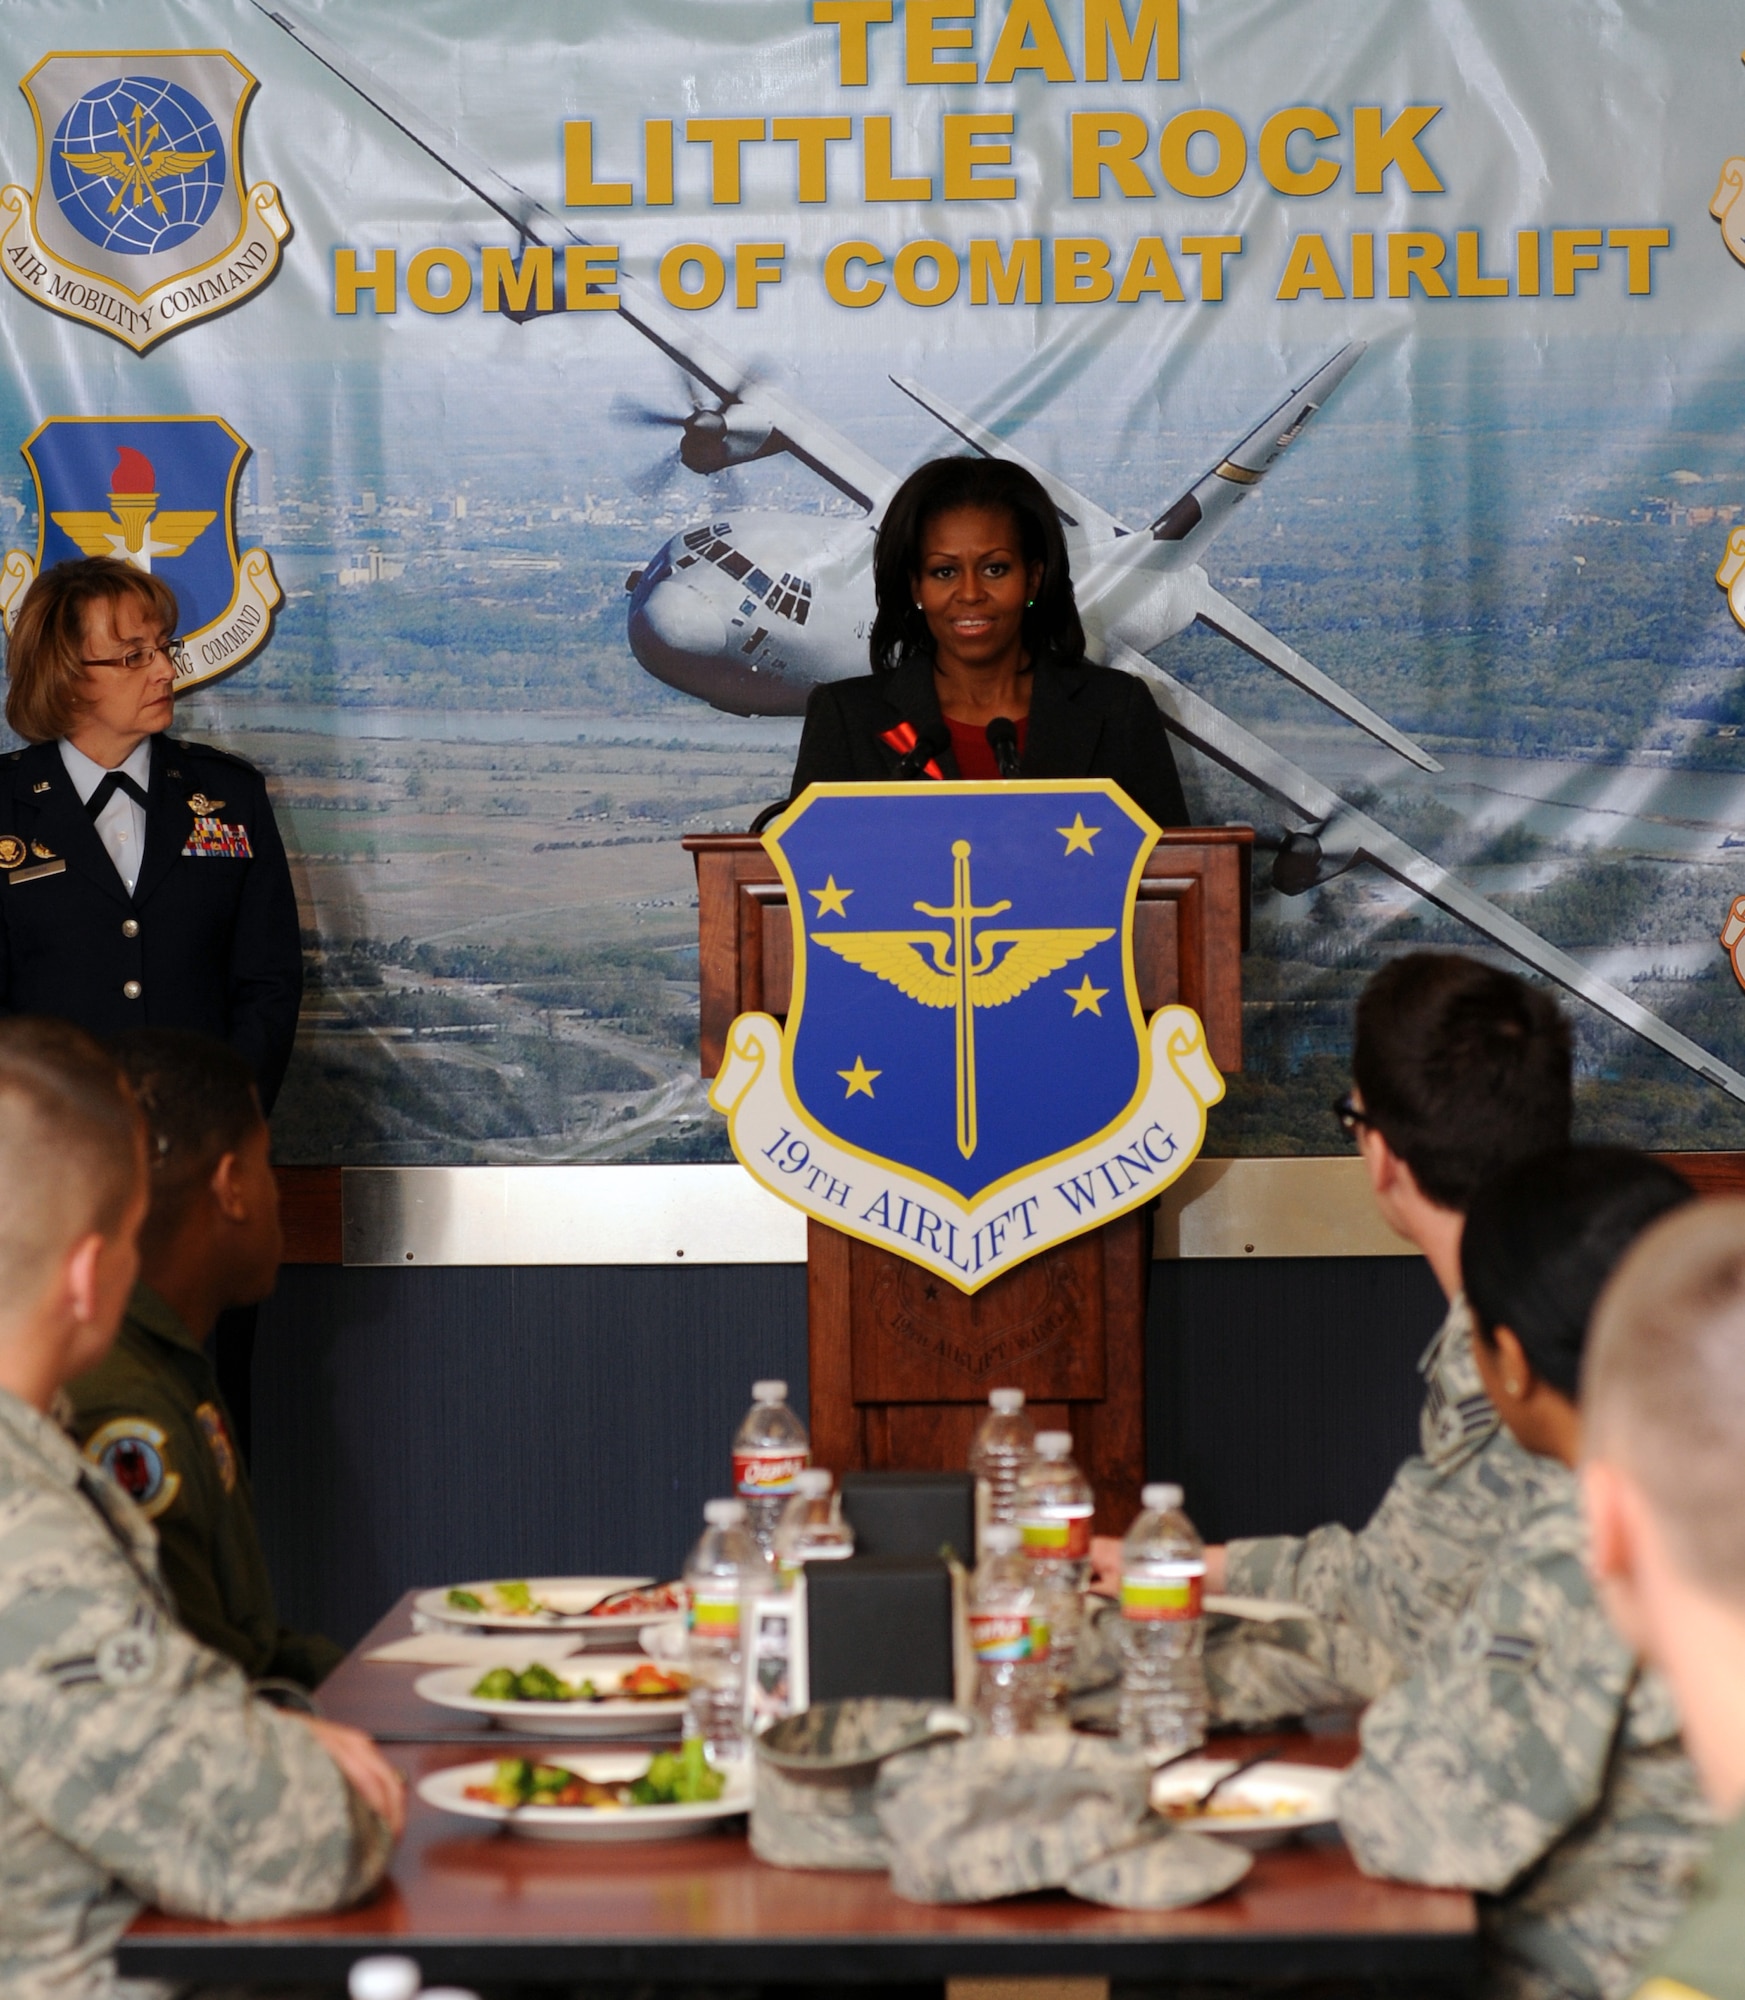 Michelle Obama speaks about the Food Transformation Initiative to Airmen at Little Rock Air Force Base, Ark., Feb. 9, 2012.  The FTI, which was implemented at the base almost 16 months ago, provides a wider variety of nutritional foods to service members and their families. (U.S. Air Force photo/Airman 1st Class Rusty Frank)